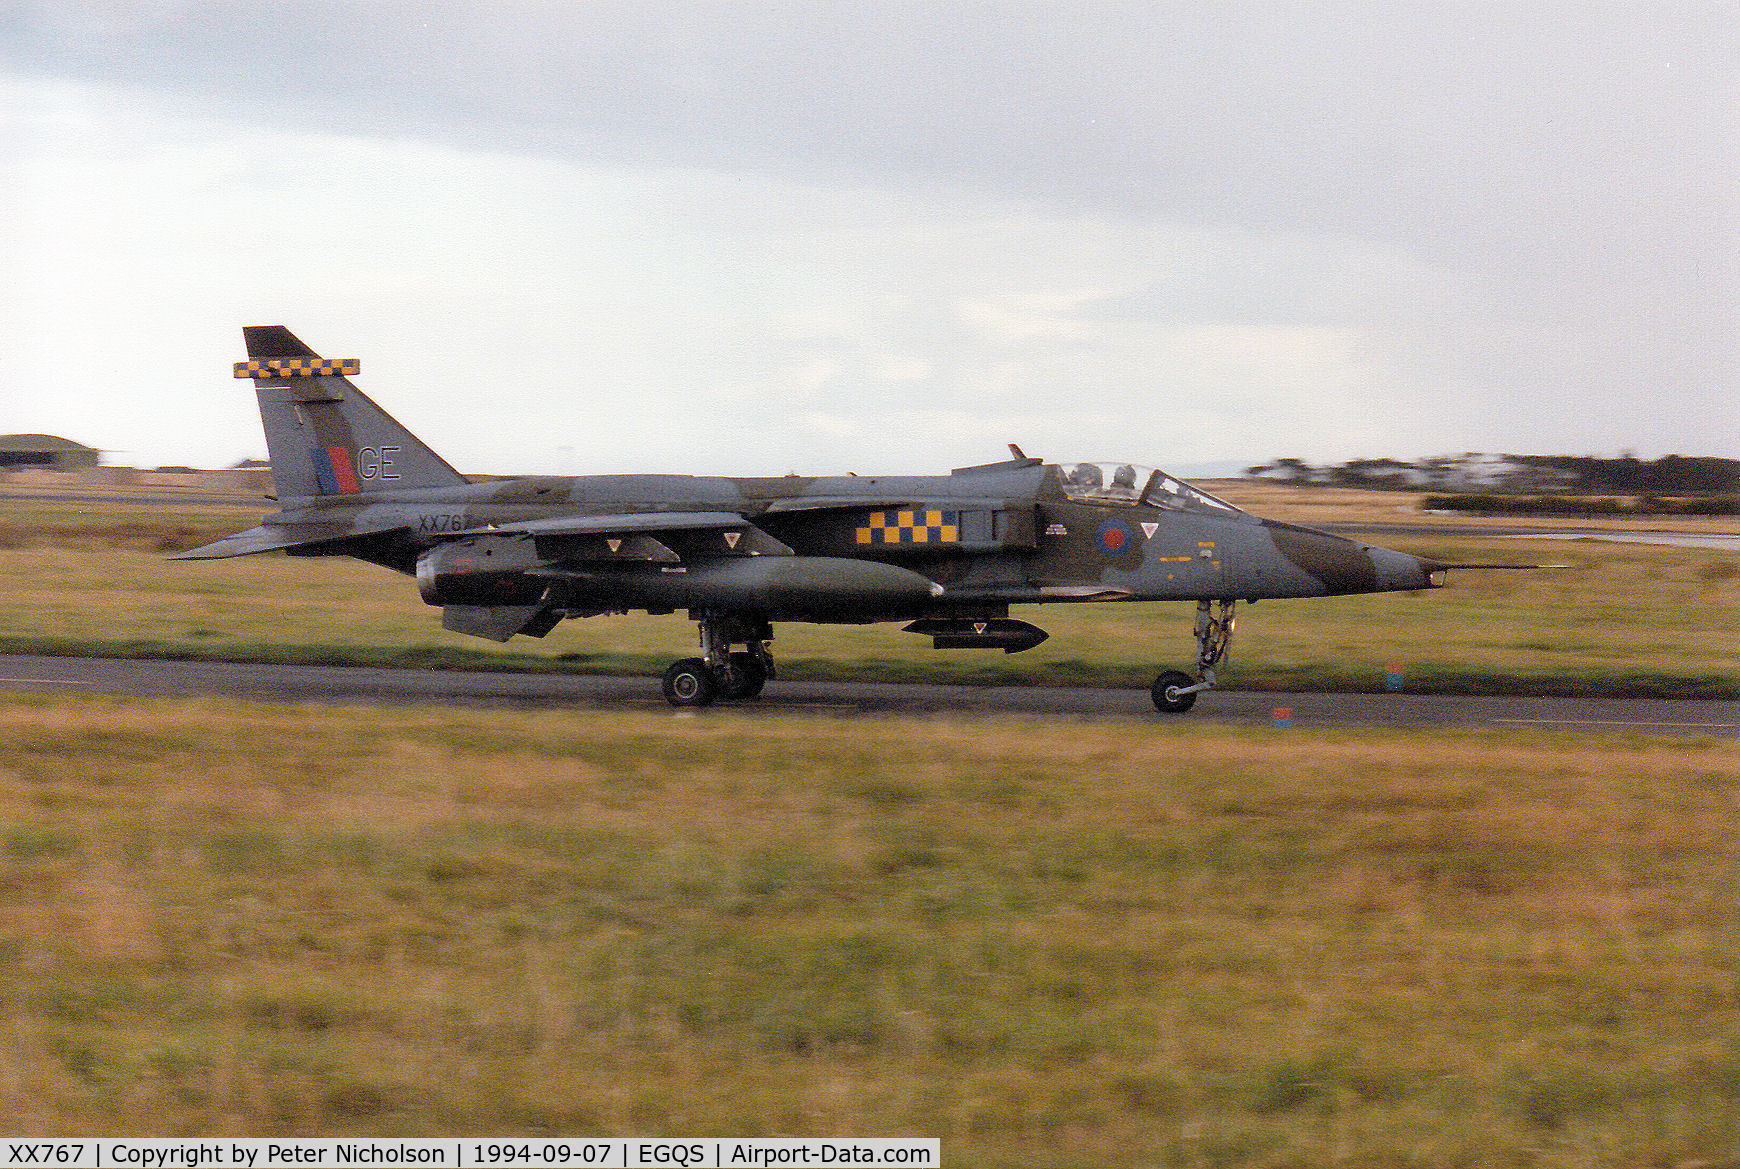 XX767, 1975 Sepecat Jaguar GR.1A C/N S.64, Jaguar GR.1A, callsign Wildcat 2, of 54 Squadron at RAF Coltishall taxying to Runway 05 at RAF Lossiemouth in September 1994.